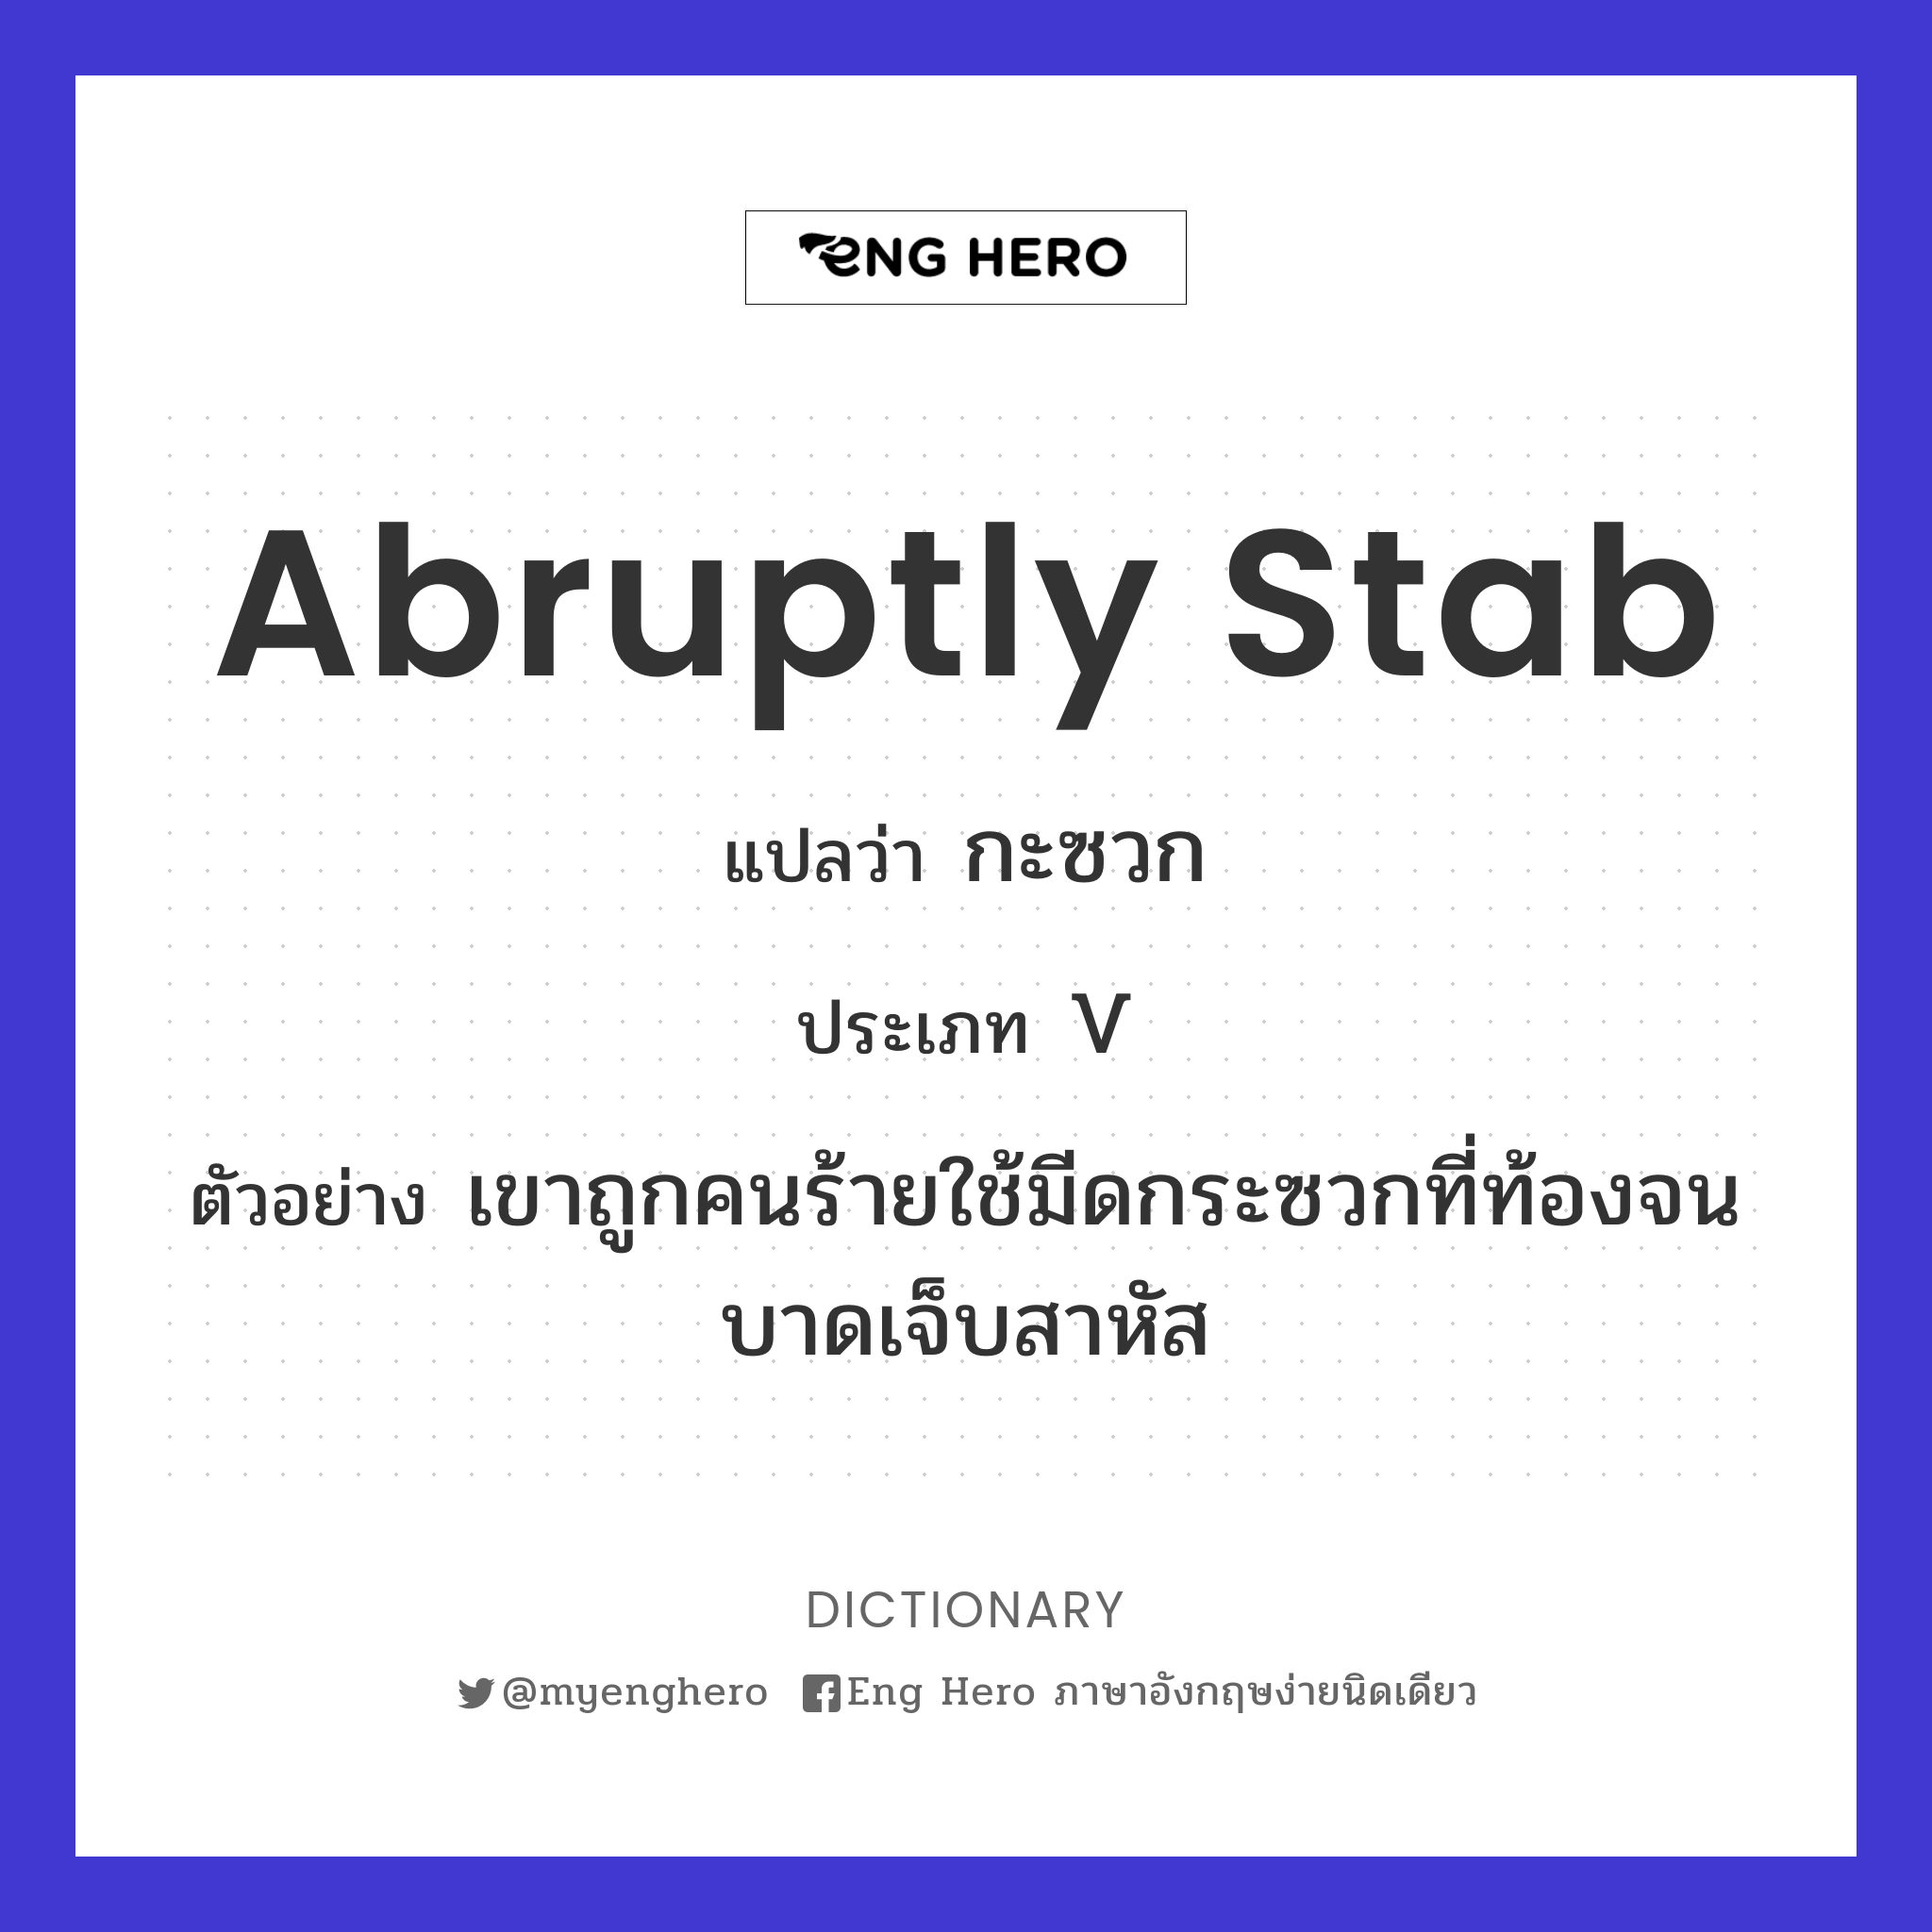 abruptly stab